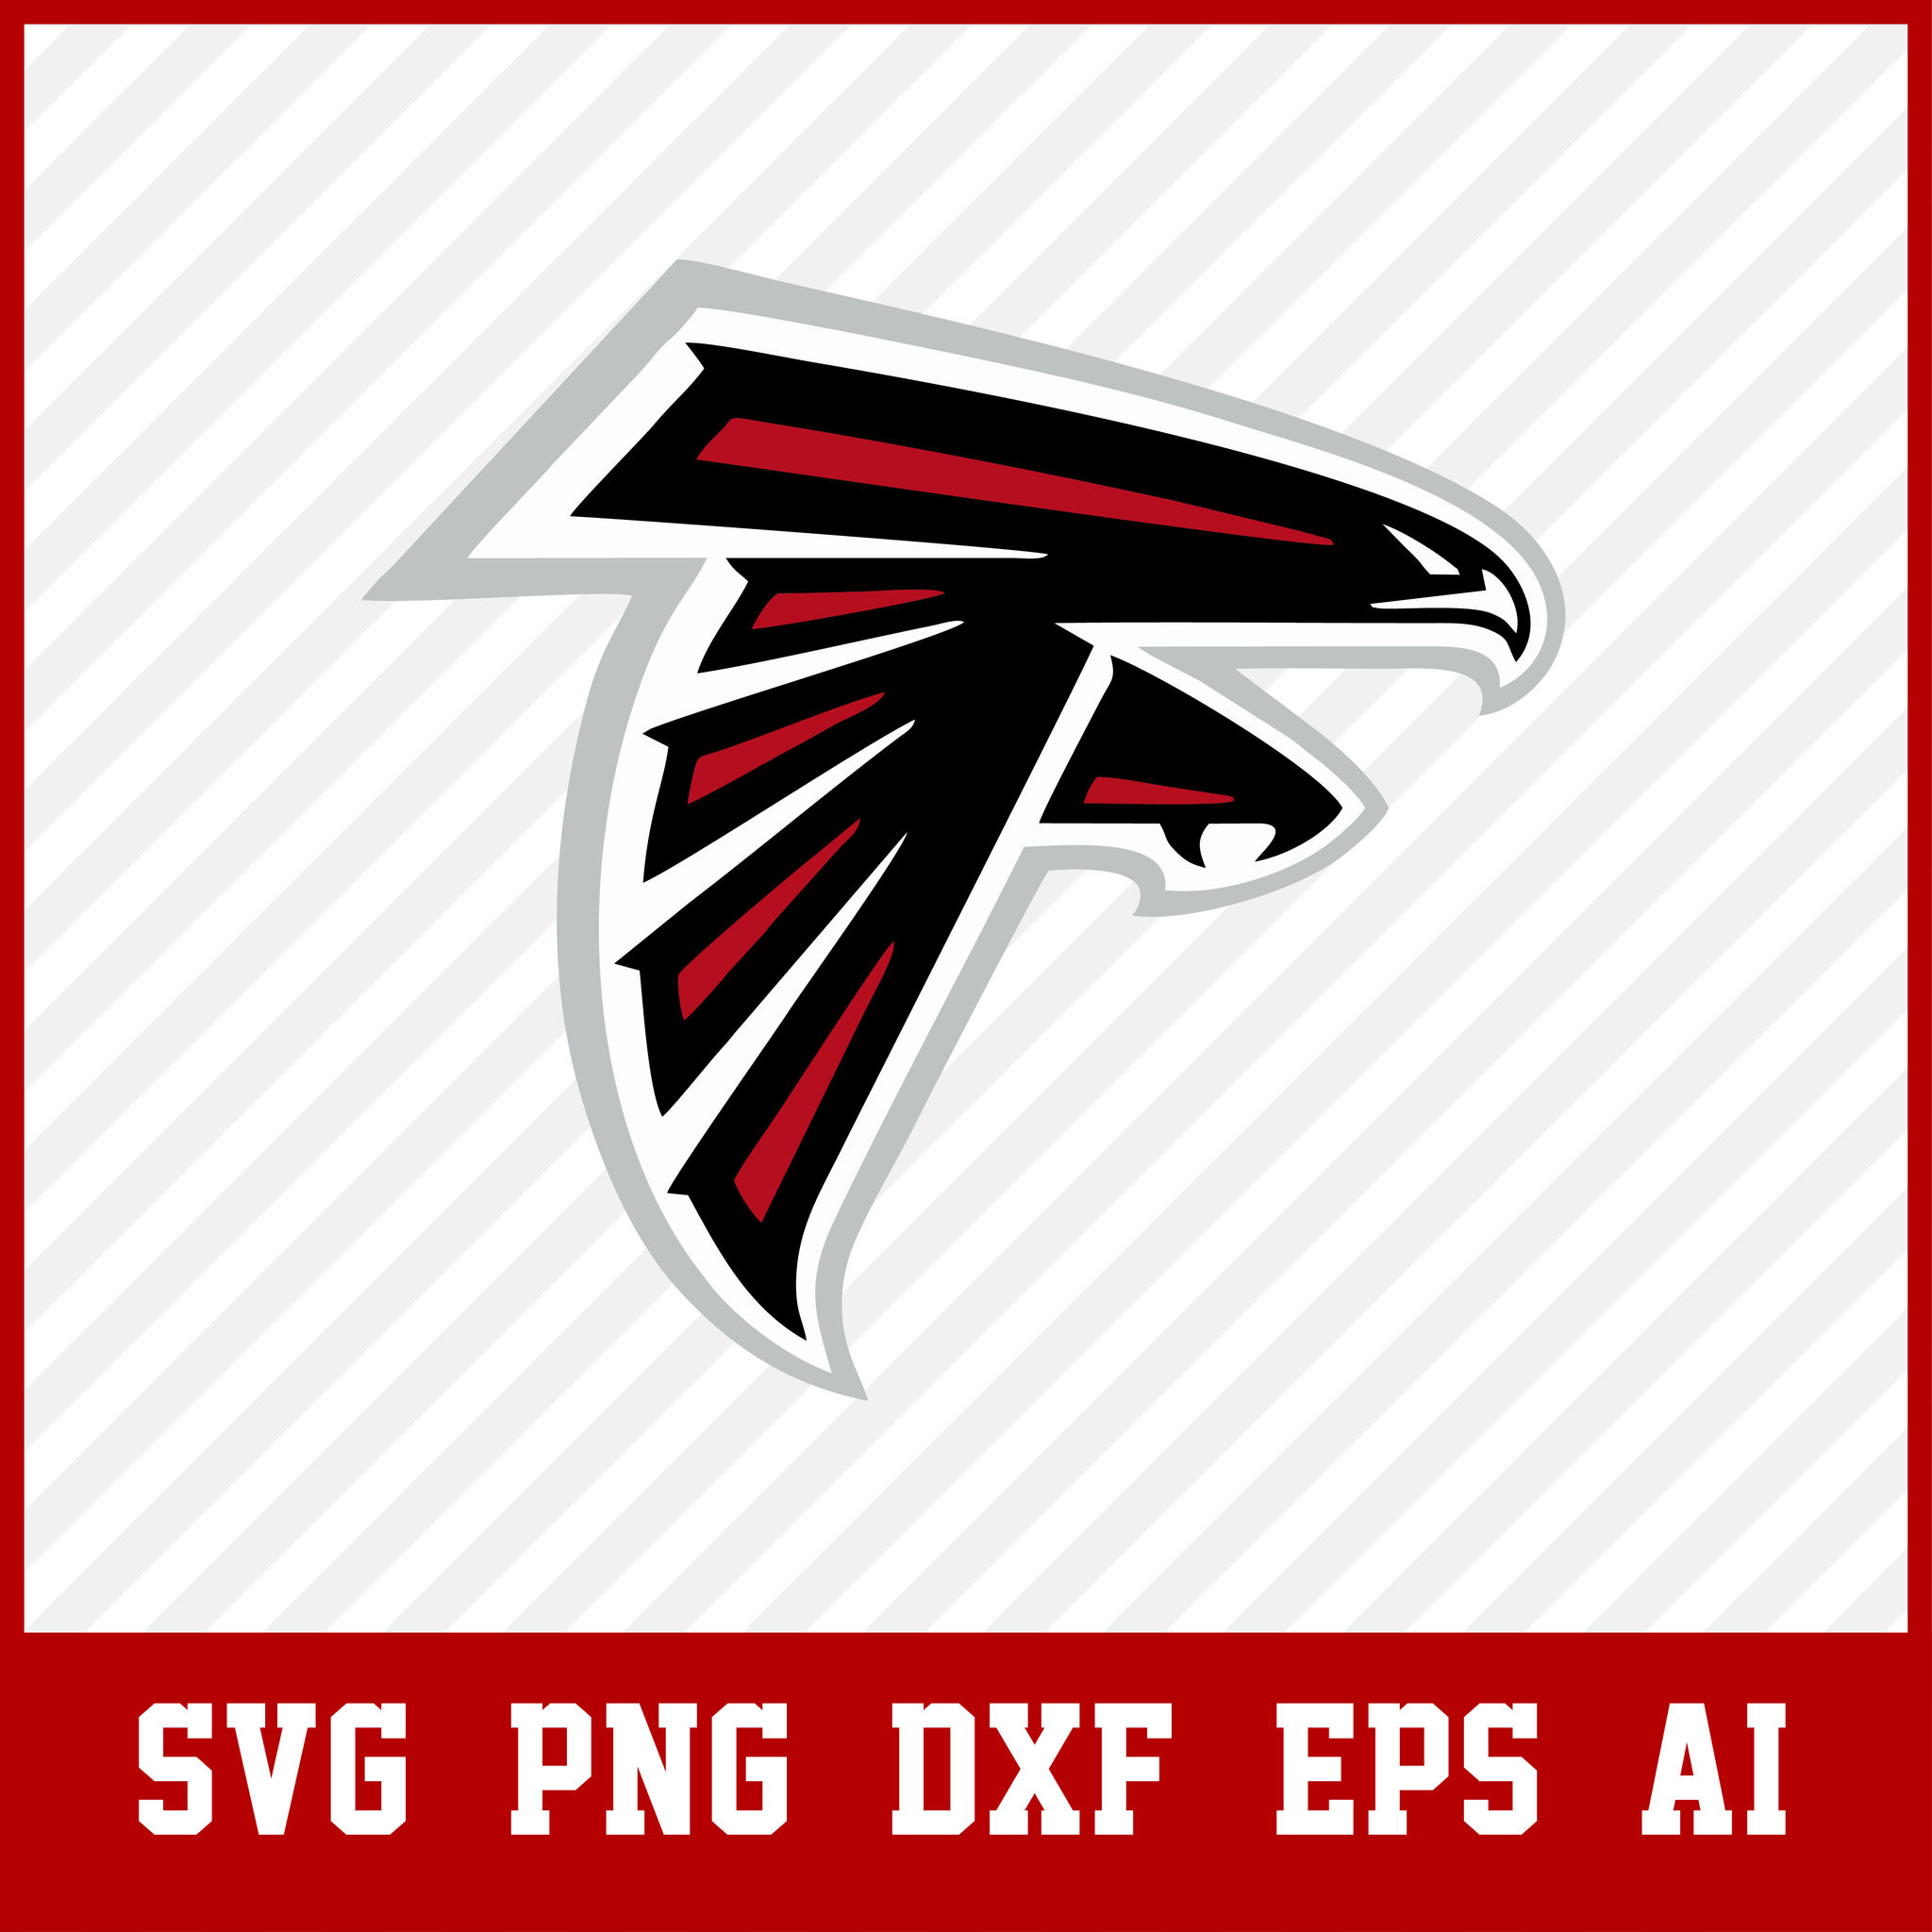 Atlanta Falcons logo svg, Football, NFL logo, team svg, dxf, clipart, cut file, vector, eps, pdf, logo, icon  • INSTANT Digital DOWNLOAD includes: 1 Zip and the following file formats: SVG, DXF, PNG, AI, PDF  • Artwork files are perfect for printing, resizing, coloring and modifying with the appropriate software.